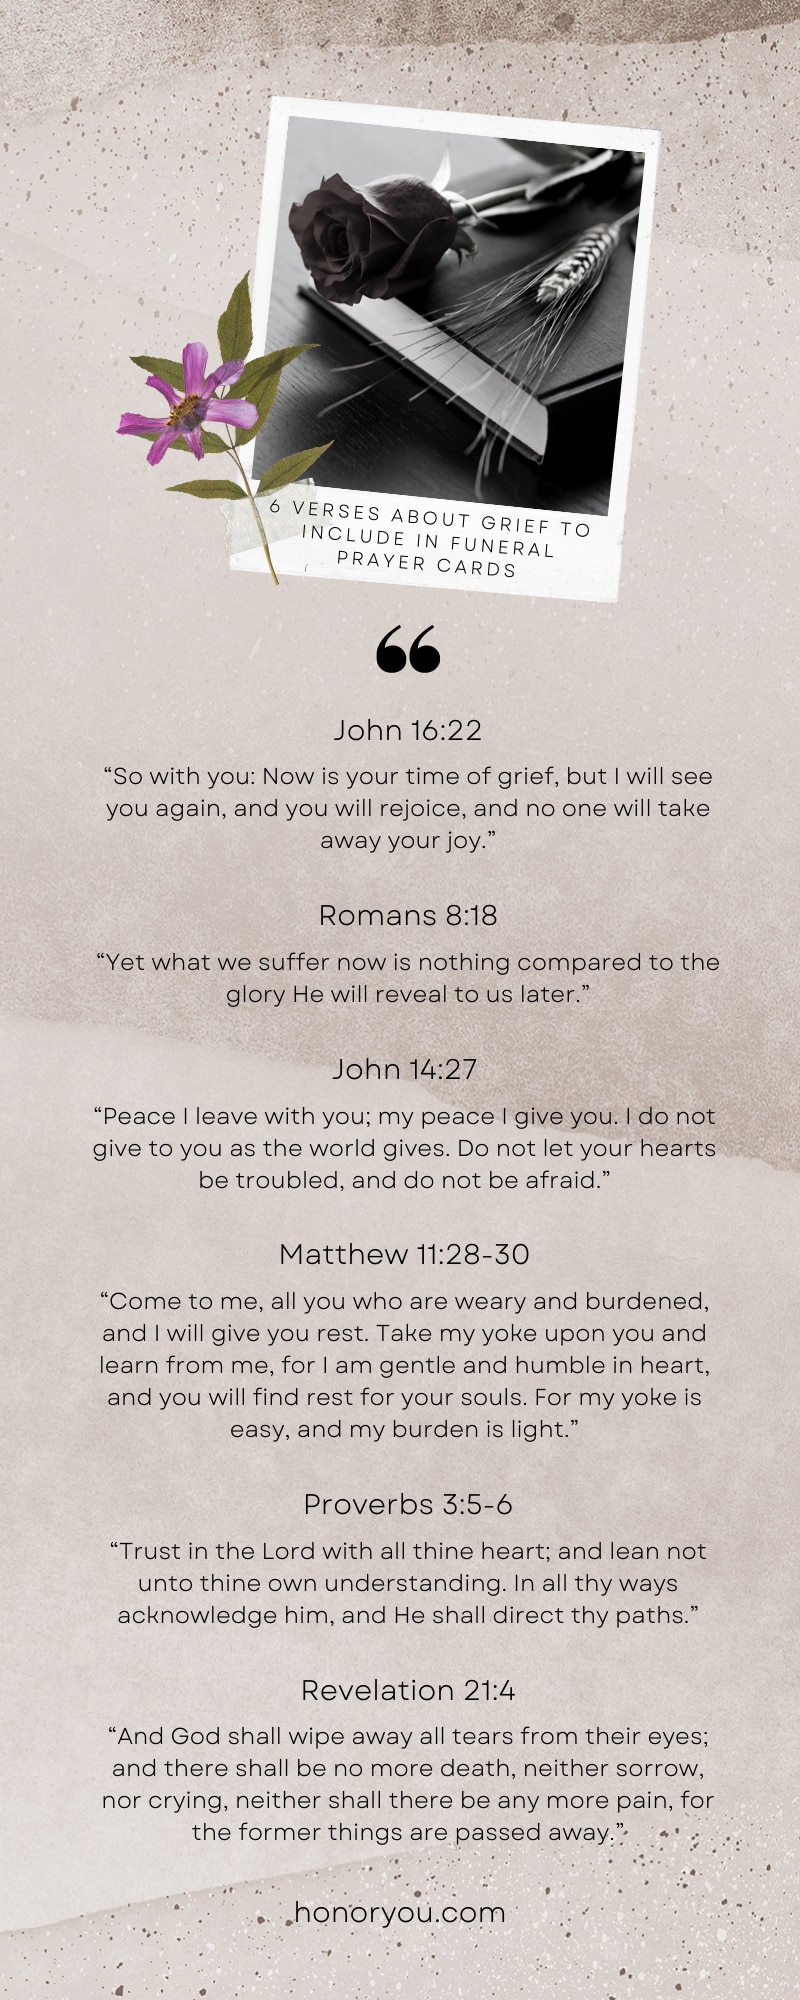 6 Verses About Grief To Include in Funeral Prayer Cards
